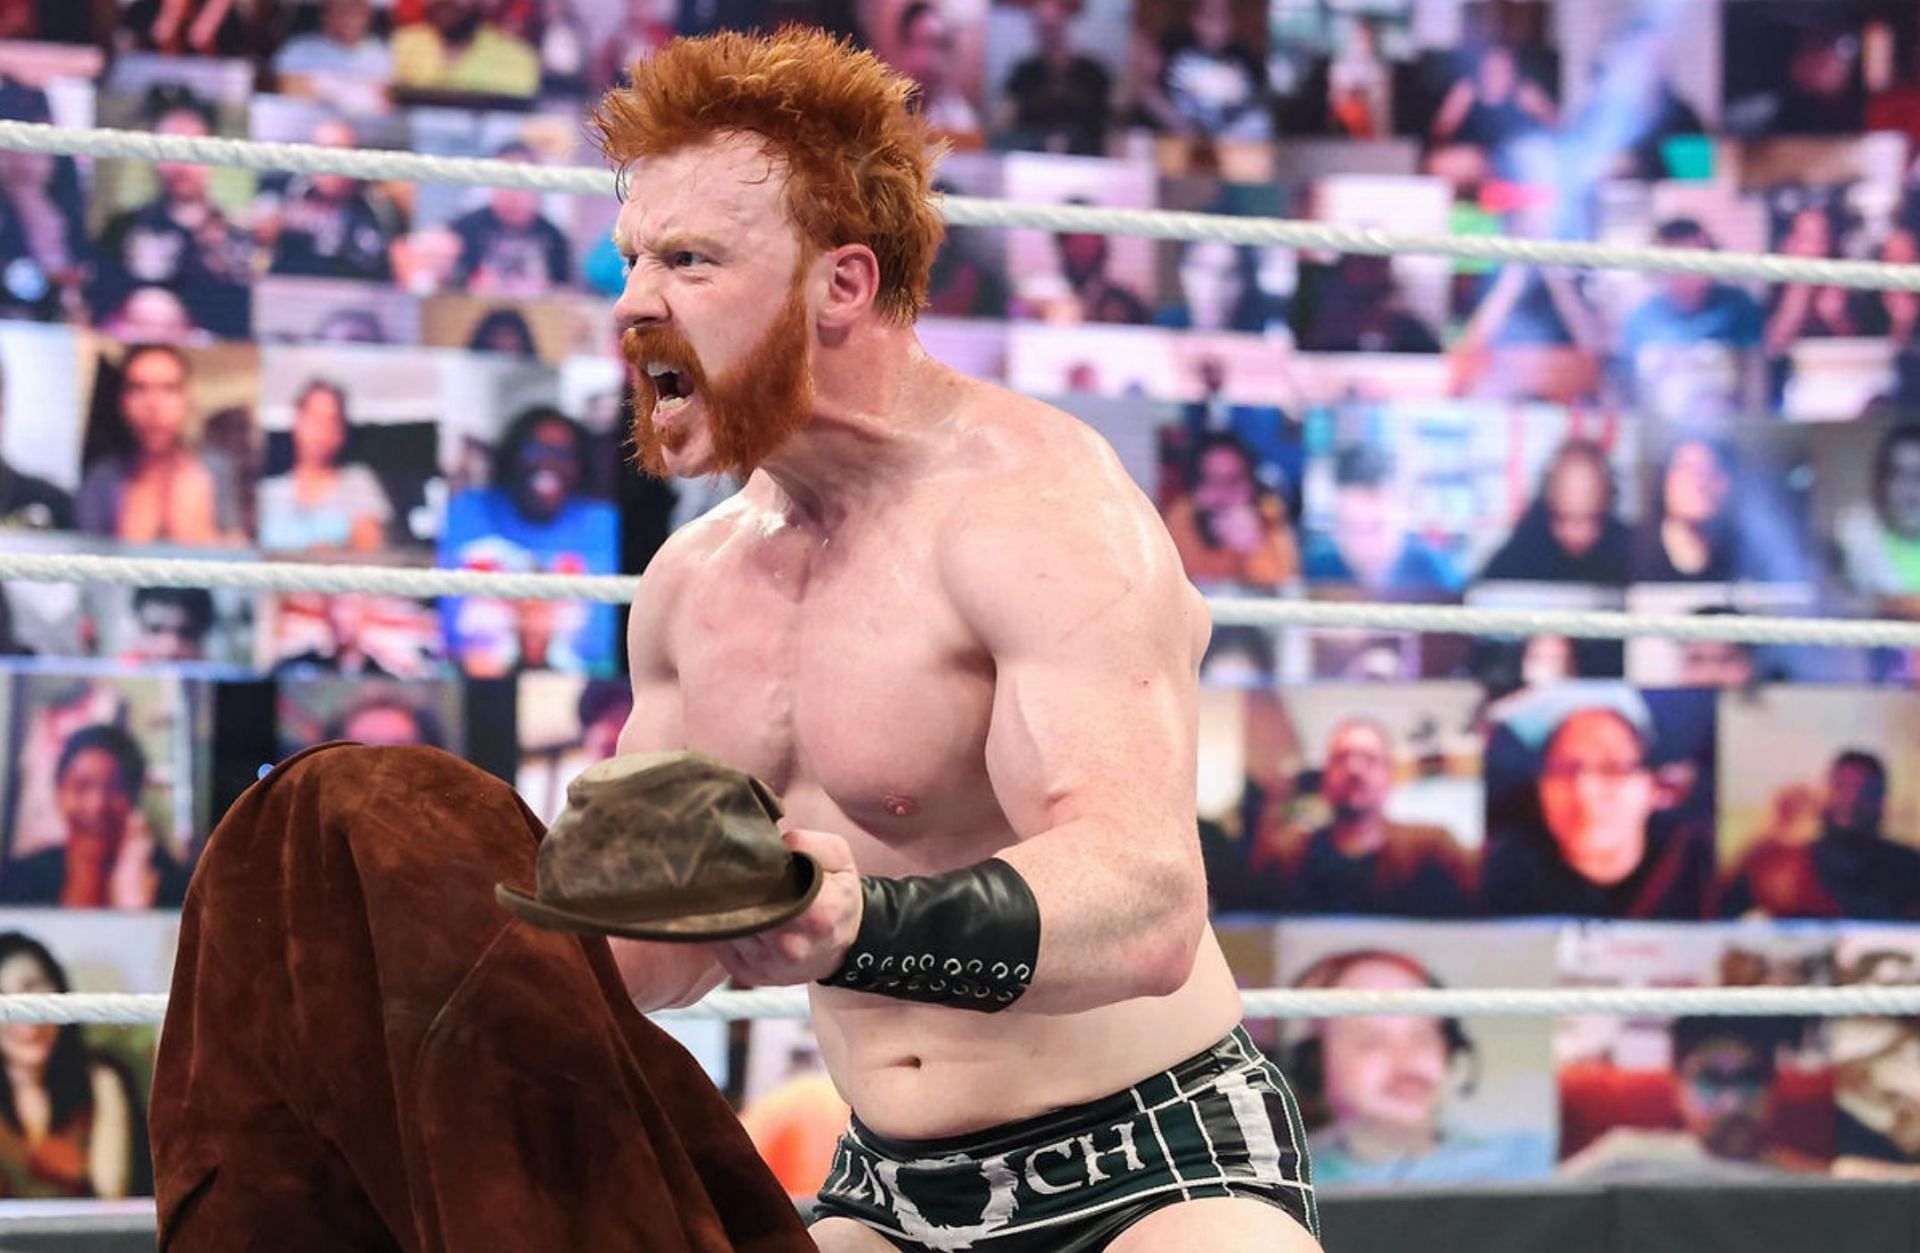 Sheamus is a four-time World Champion in WWE